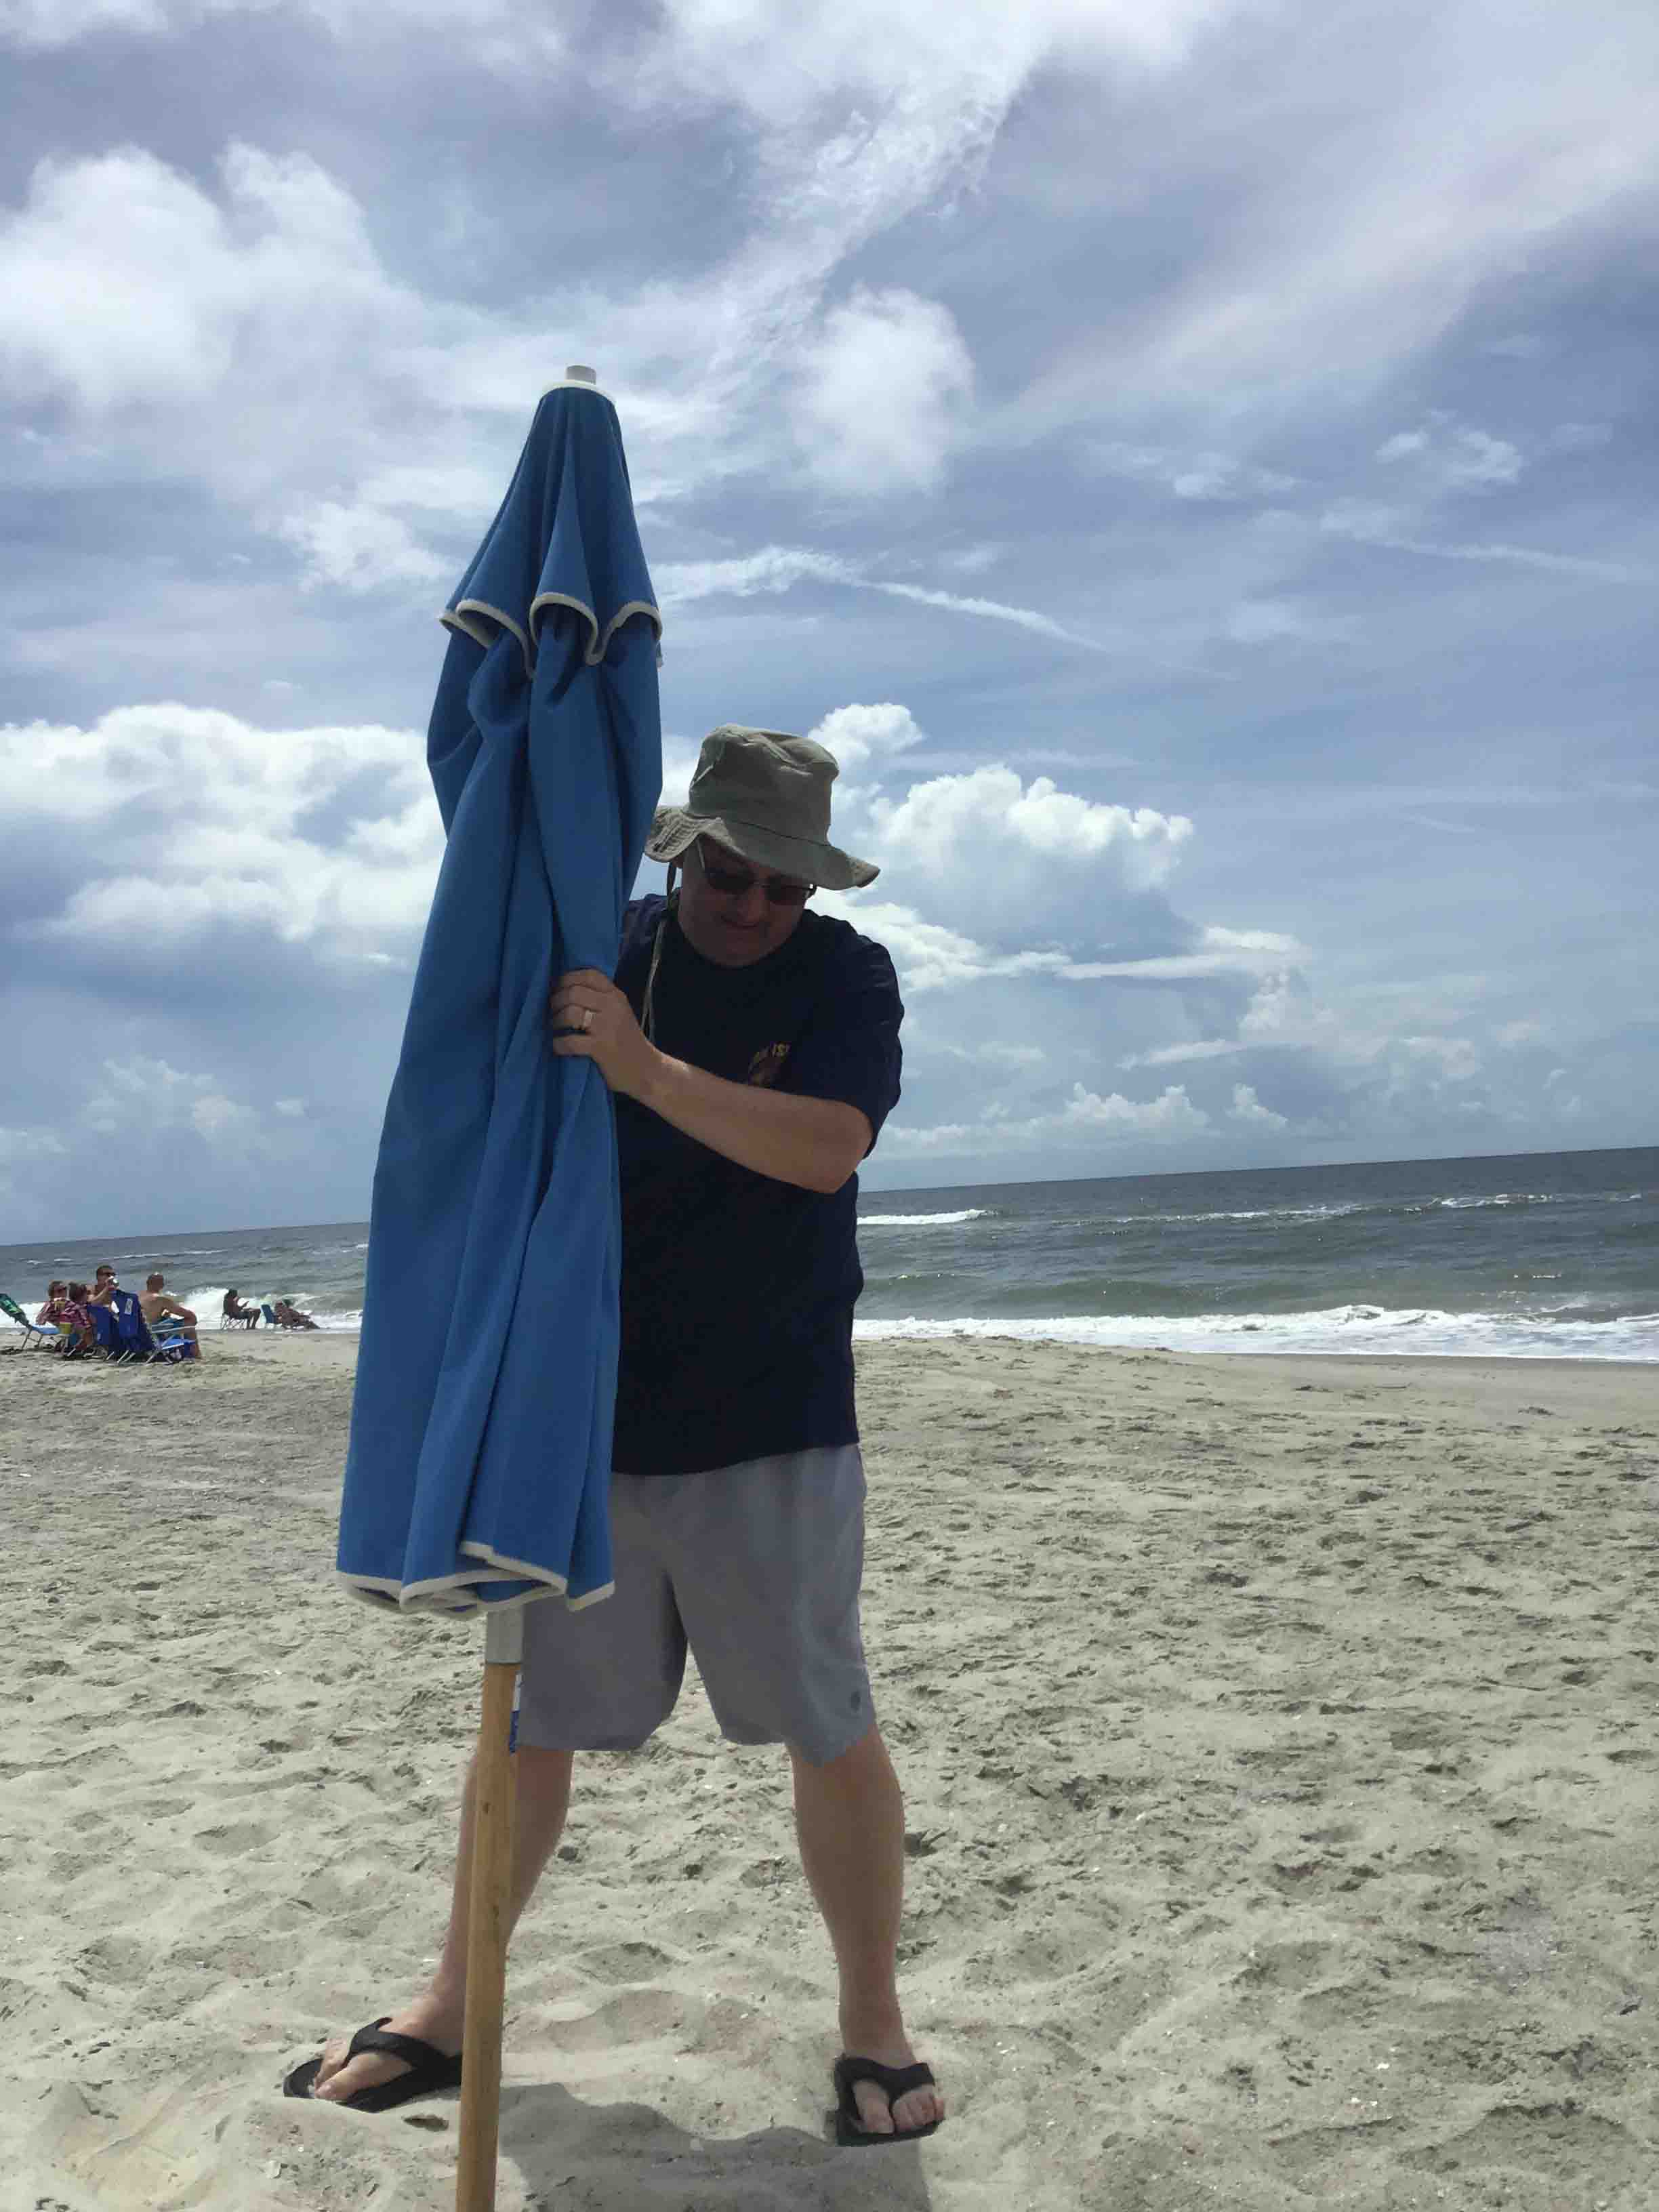 Gene Curtis is an old hand at putting up the umbrella!                             Location:  Sandpiper Cottage, Oak Island, NC                                 Source: Julane Crabtree                                Date: 28 Jul 2023